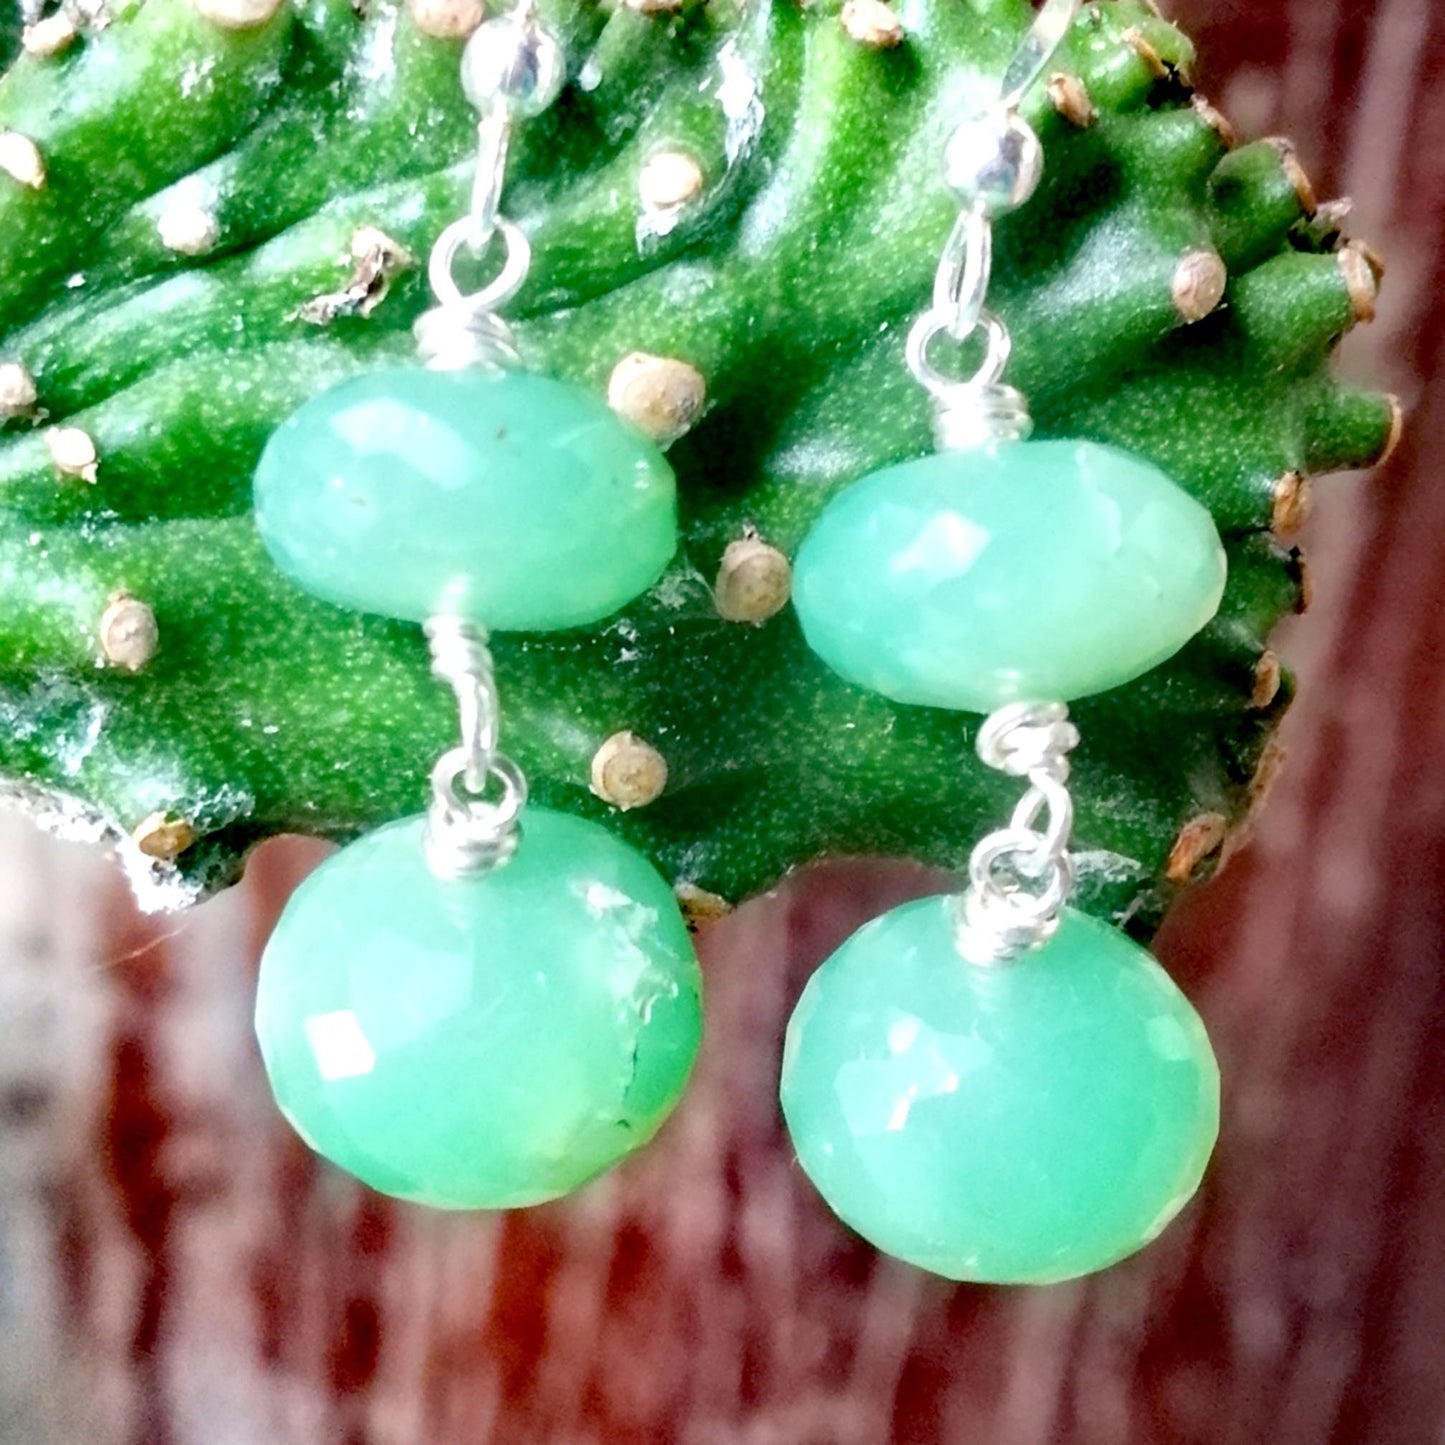 Chrysoprase Double Drop Earrings - 4th Chakra - They looks like candy!! Open your heart with these vibrant orbs.